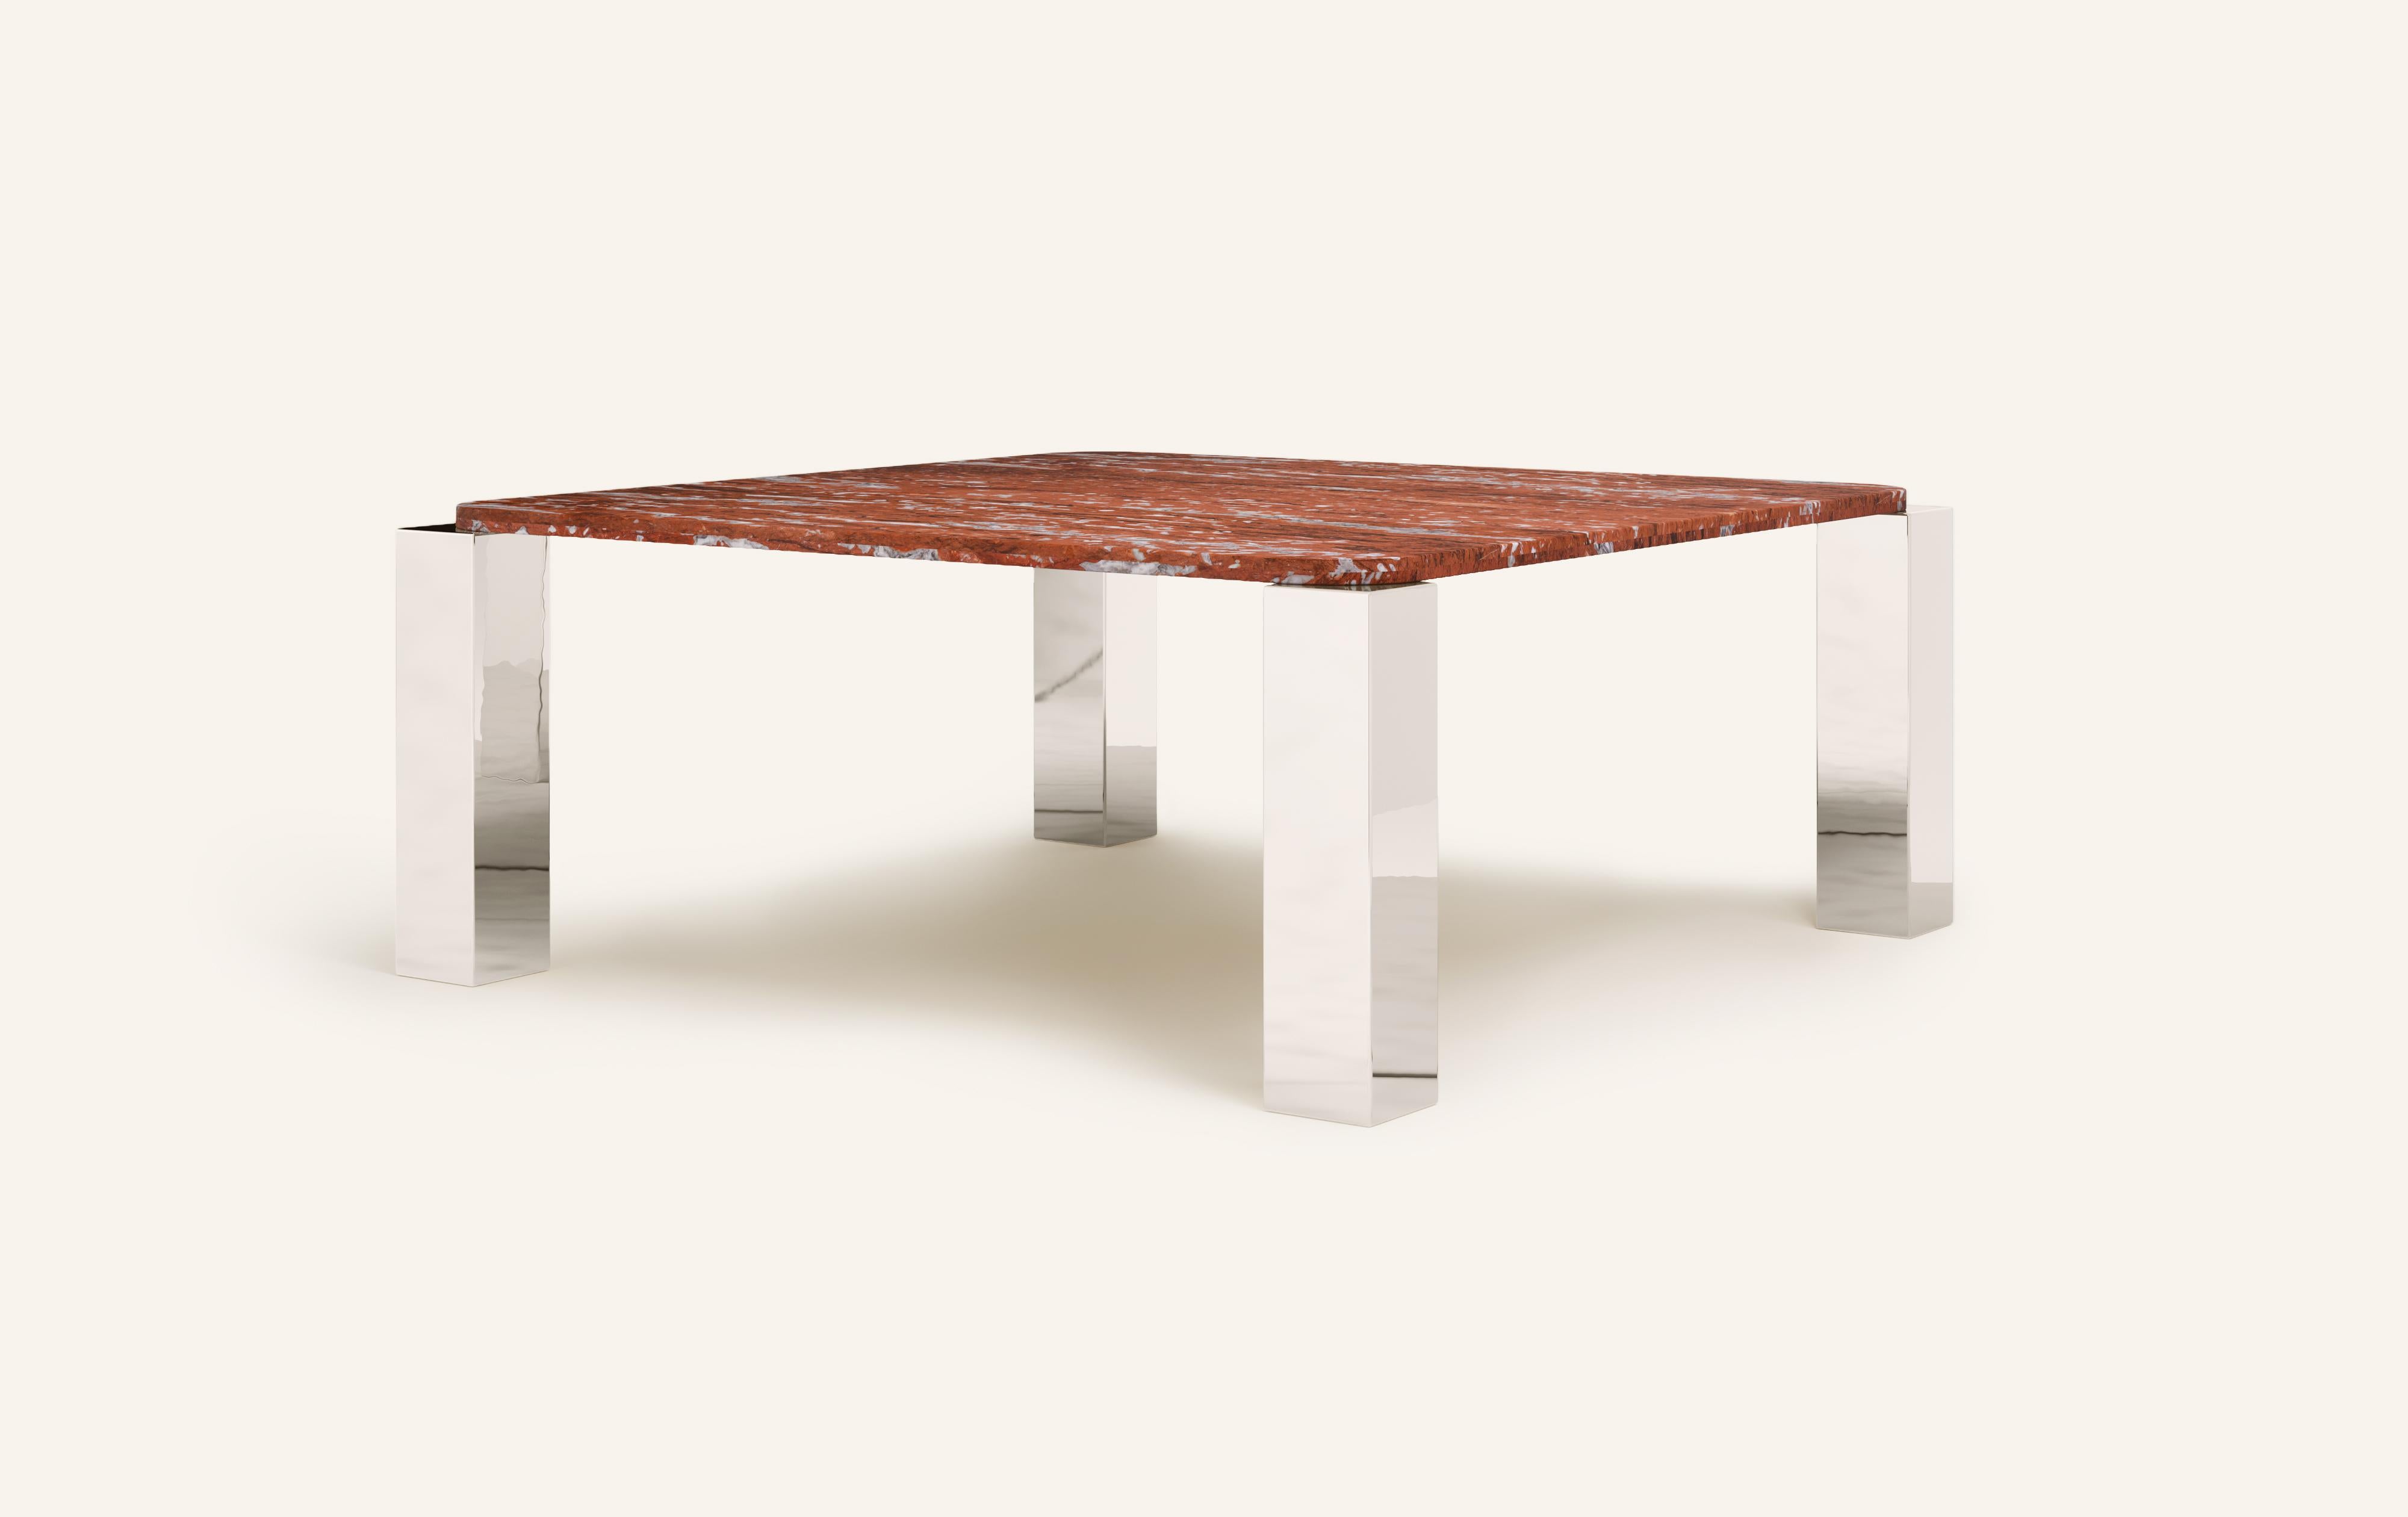 Organic Modern FORM(LA) Cubo Square Dining Table 74”L x 74”W x 30”H Francia Marble & Chrome For Sale